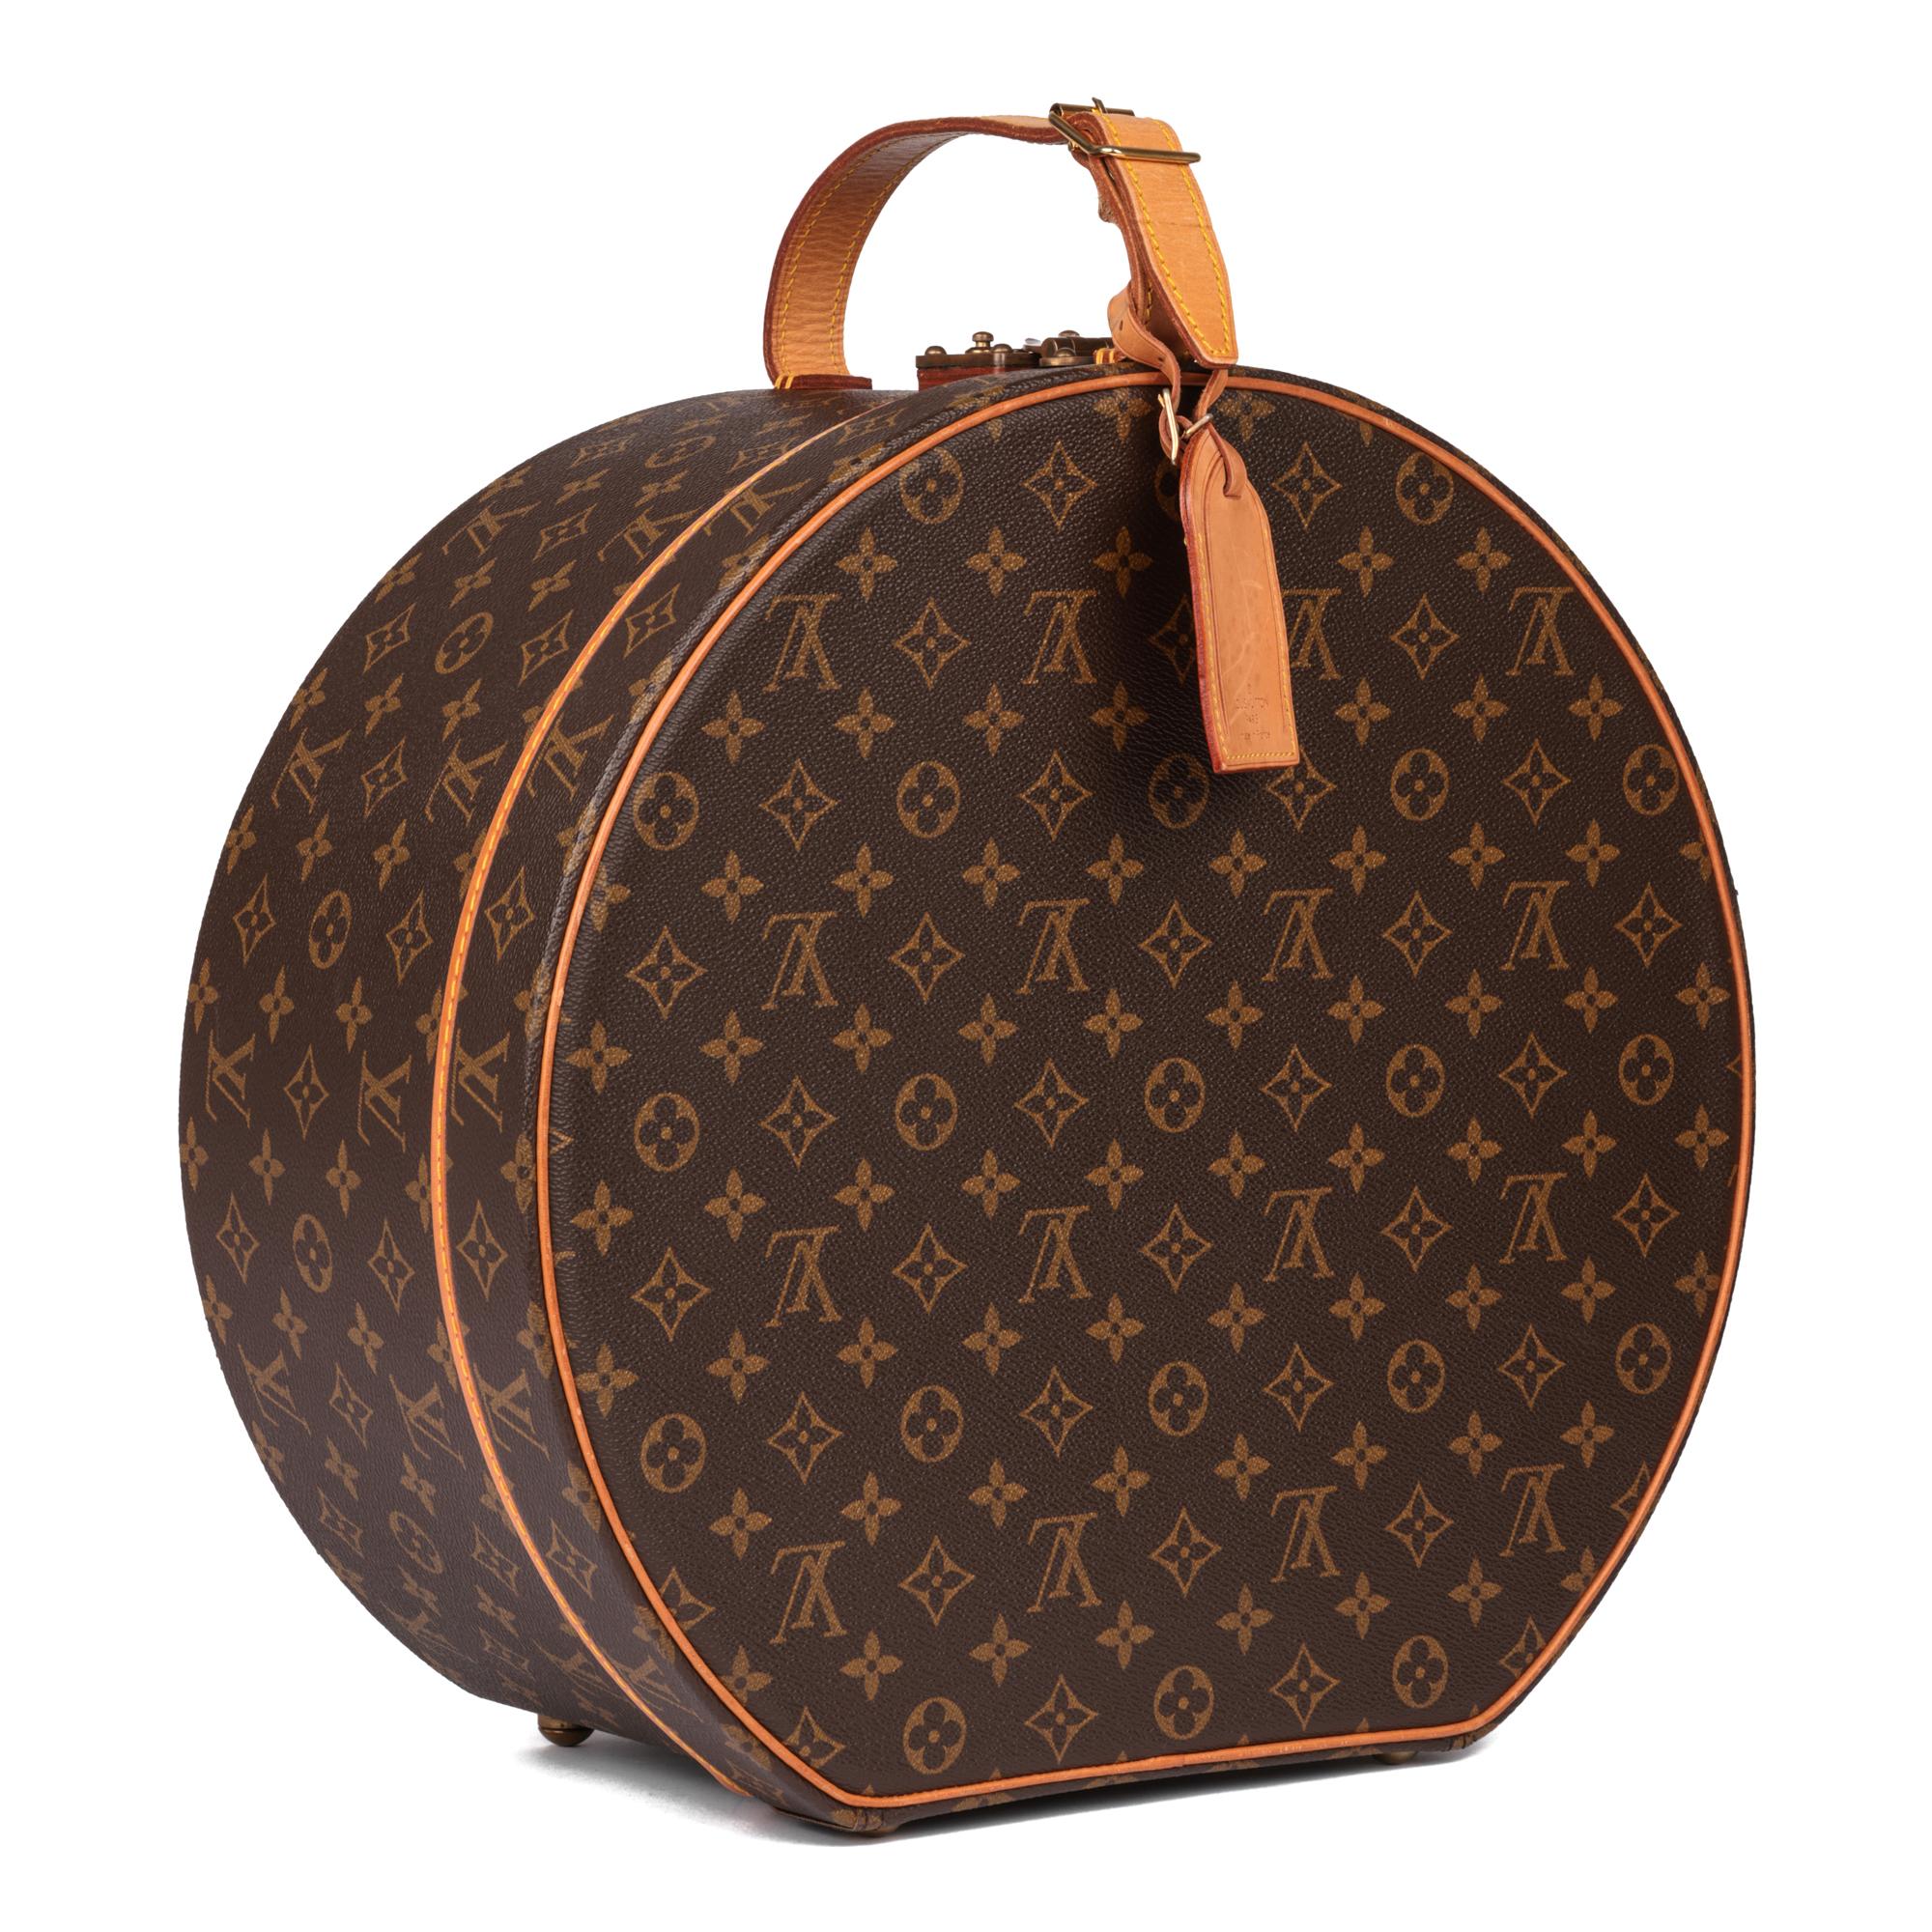 LOUIS VUITTON
Brown Monogram Coated Canvas & Vachetta Leather Boite Chapeaux 40

Xupes Reference: HB5136
Serial Number: A10934
Age (Circa): 1990
Accompanied By: Luggage Tag, Keys
Authenticity Details: Serial Stamp (Made in France)
Gender: